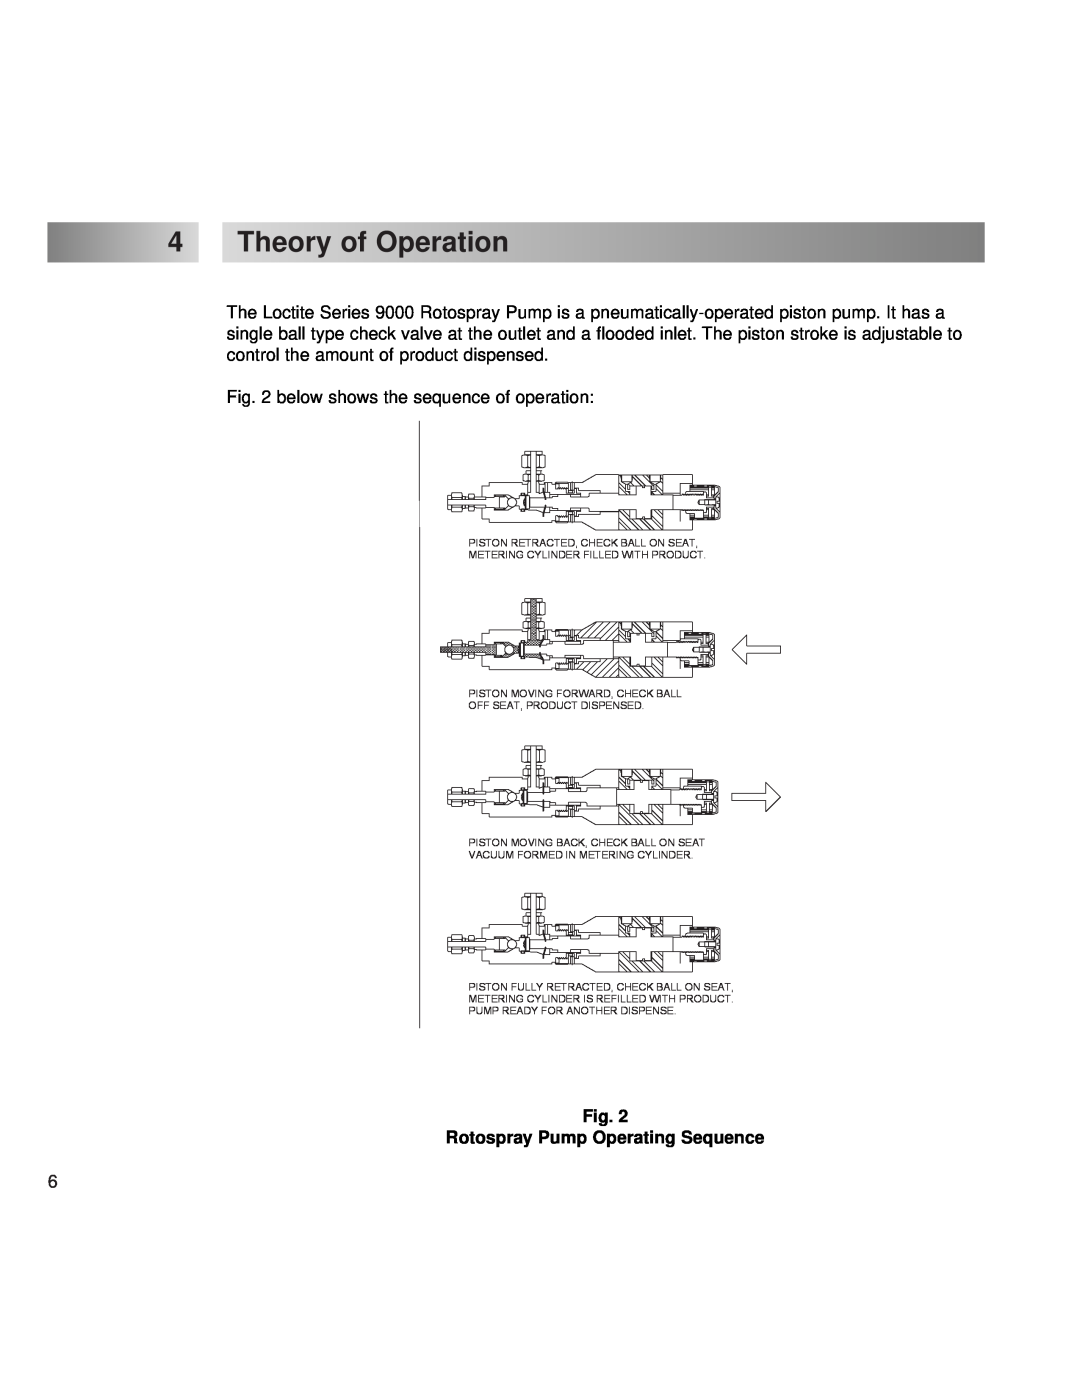 Henkel 9000 operation manual 4Theory of Operation, Fig. Rotospray Pump Operating Sequence 